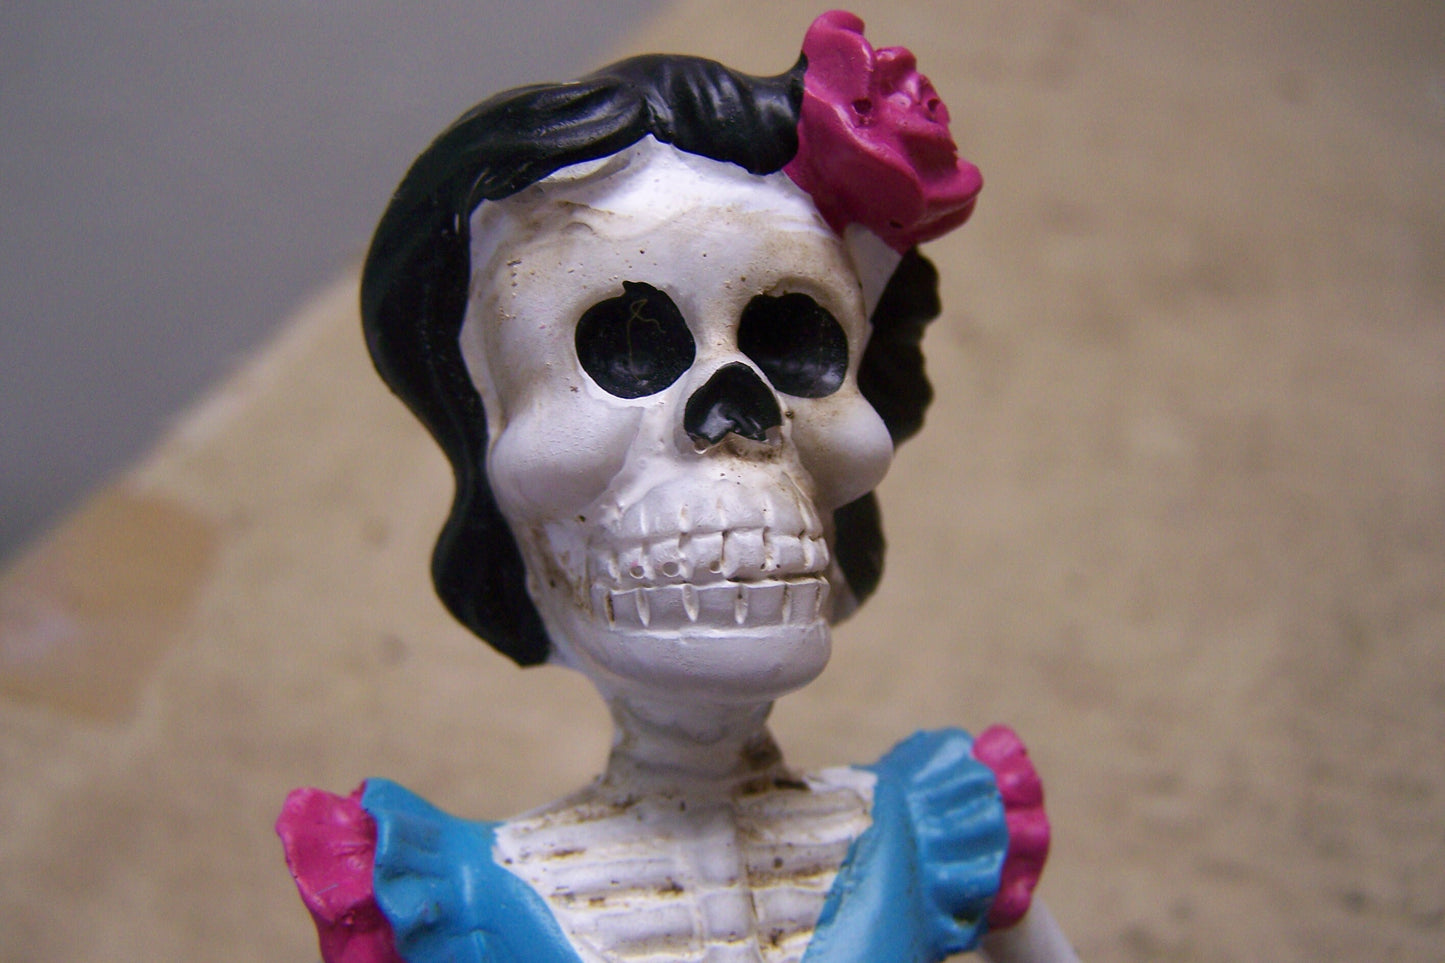 Small Painted Resin Day of the Dead Skeleton Lady in Pink Dress - Mexico